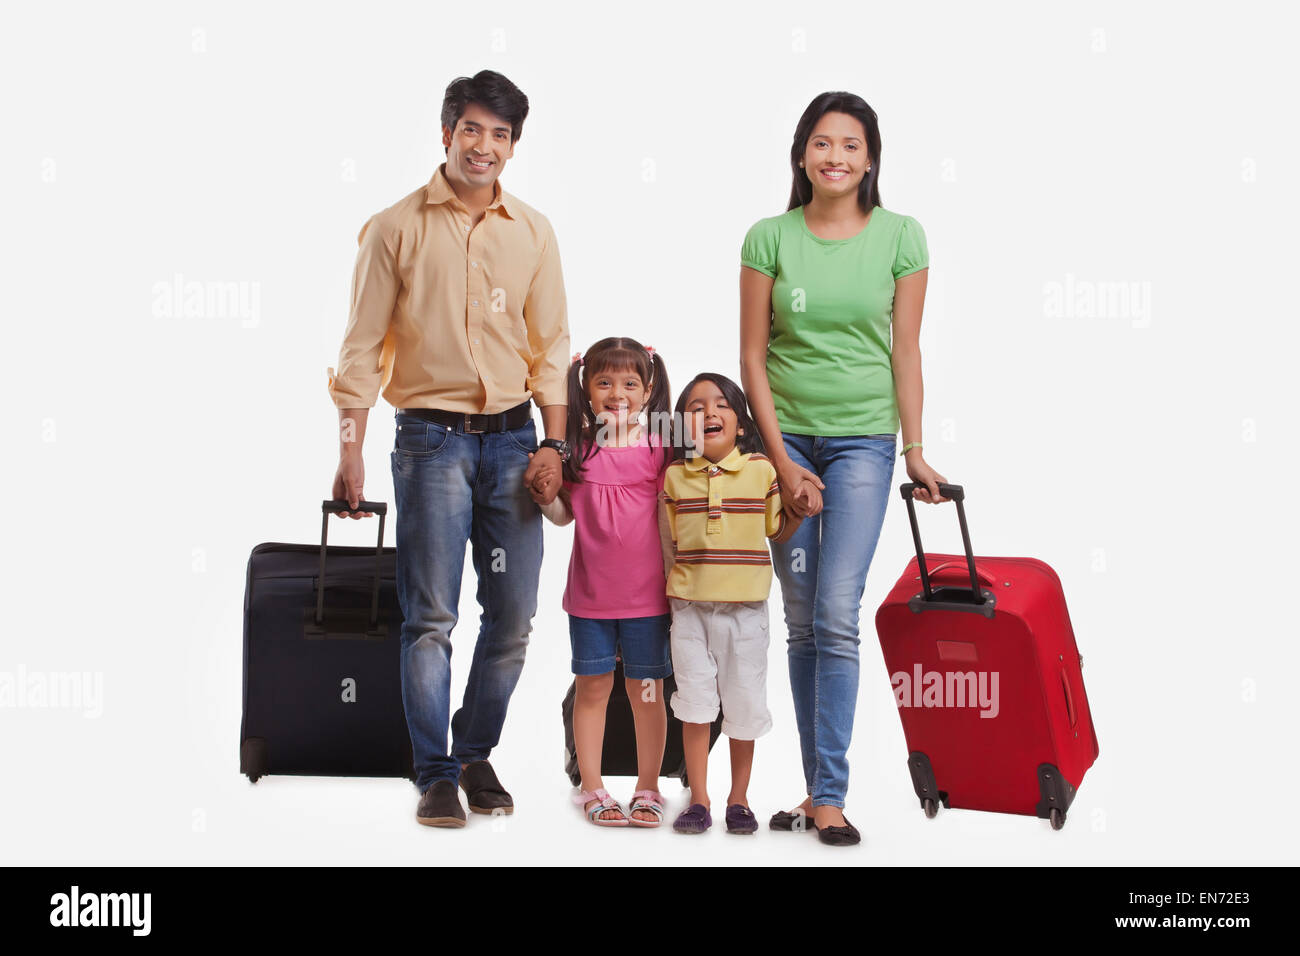 Portrait of family with suitcases Stock Photo